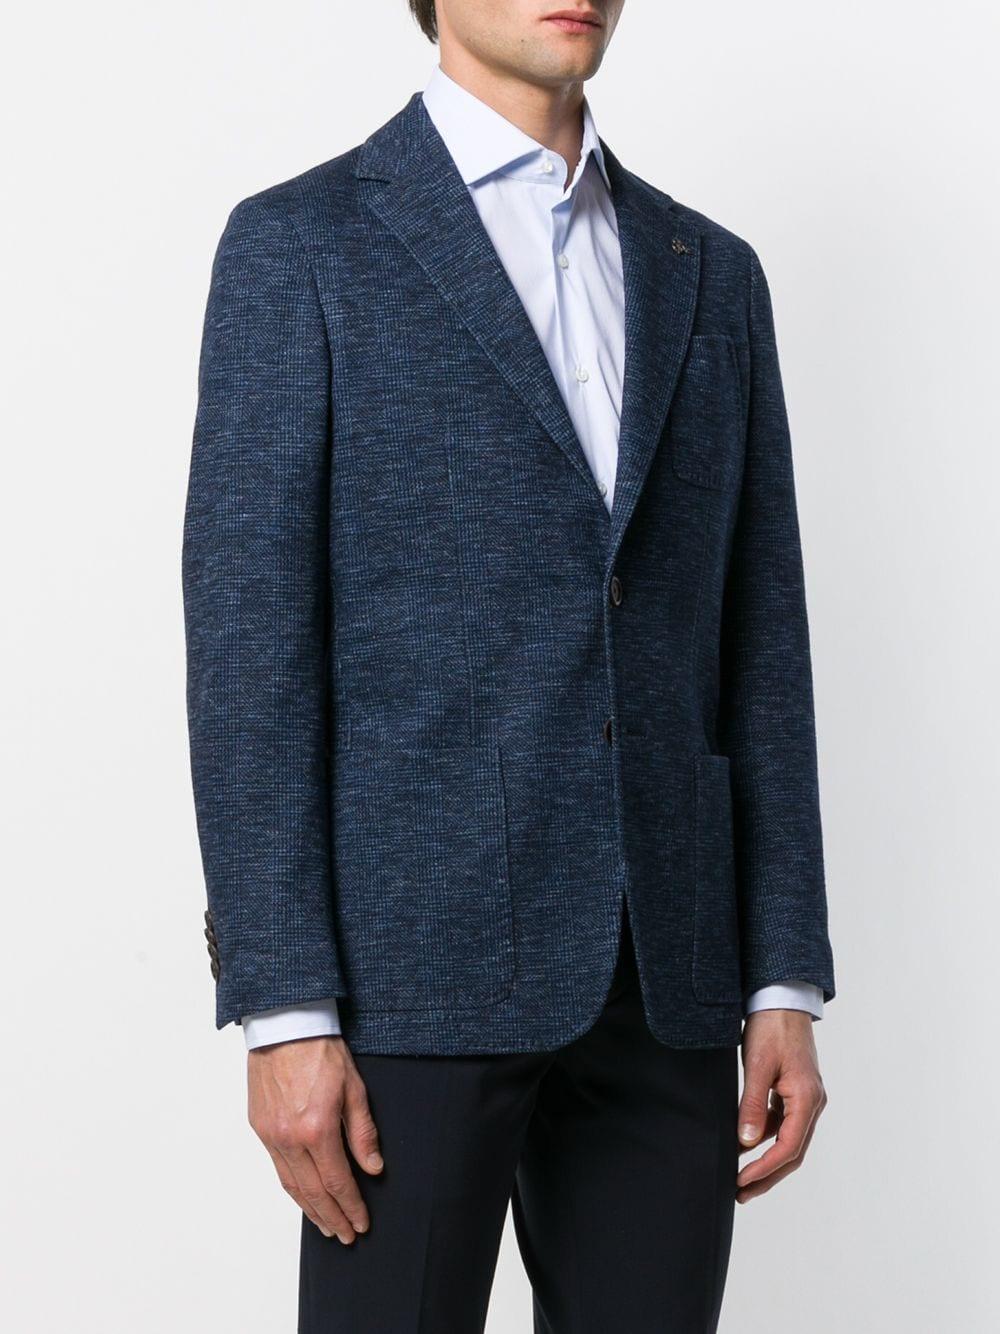 Canali Synthetic Checked Fitted Blazer in Blue for Men - Lyst